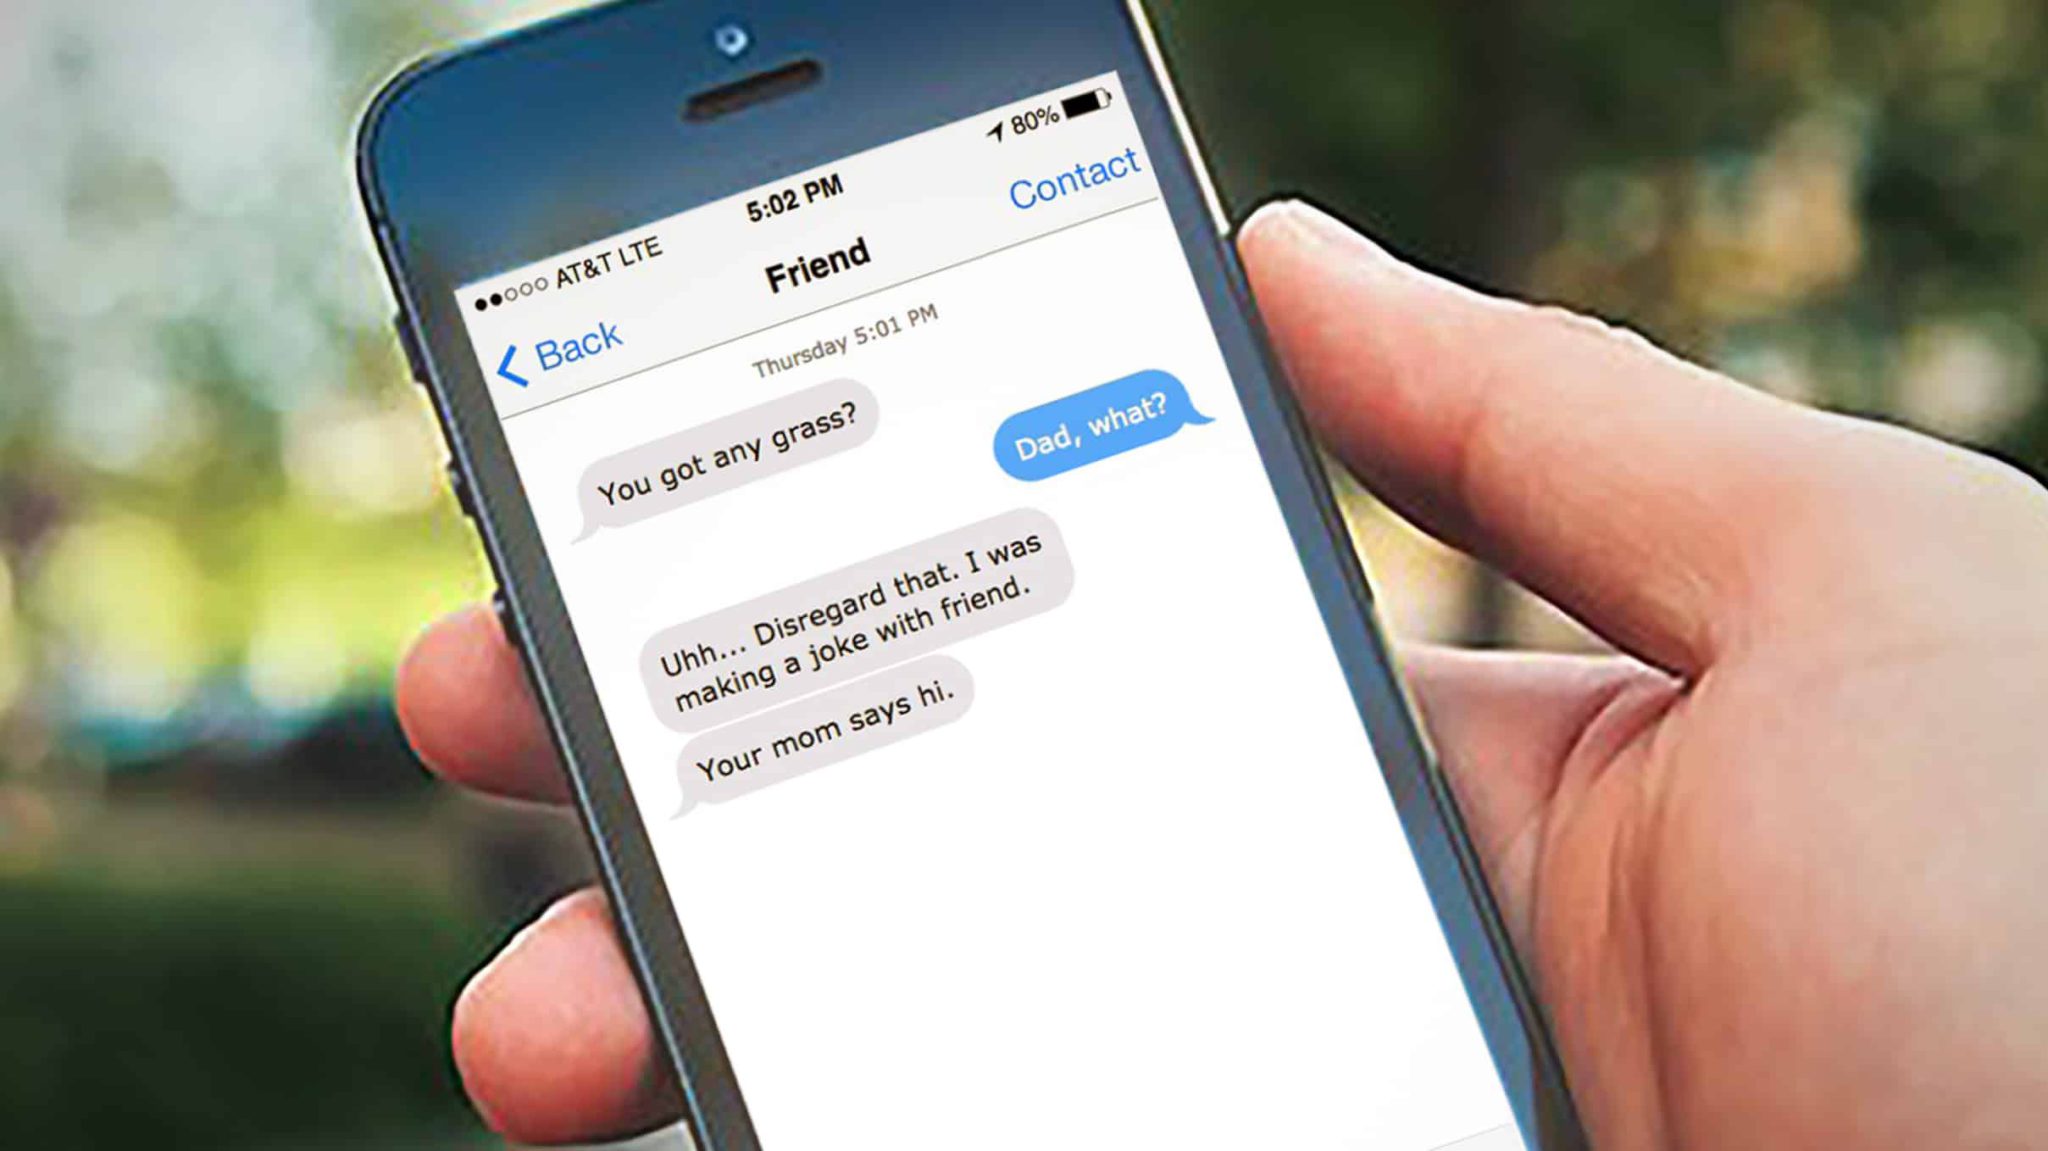 Sneaky Texting: 10 Phrases Your Dad May Be Using To Text About Weed